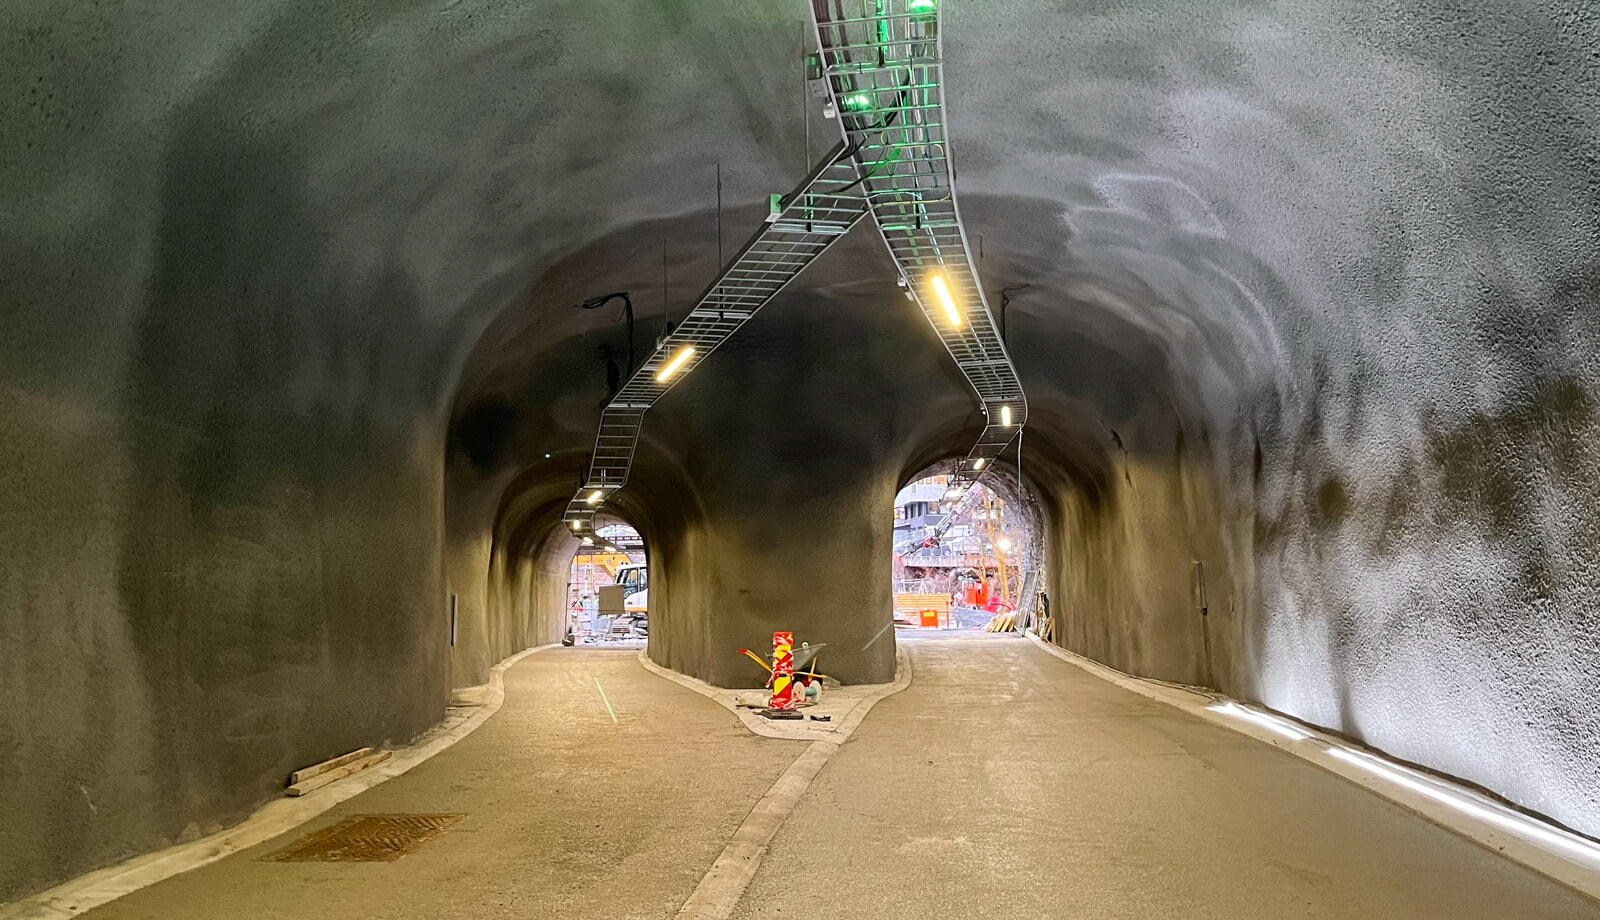 Here's a look at the longest purpose-built cycling tunnel on the